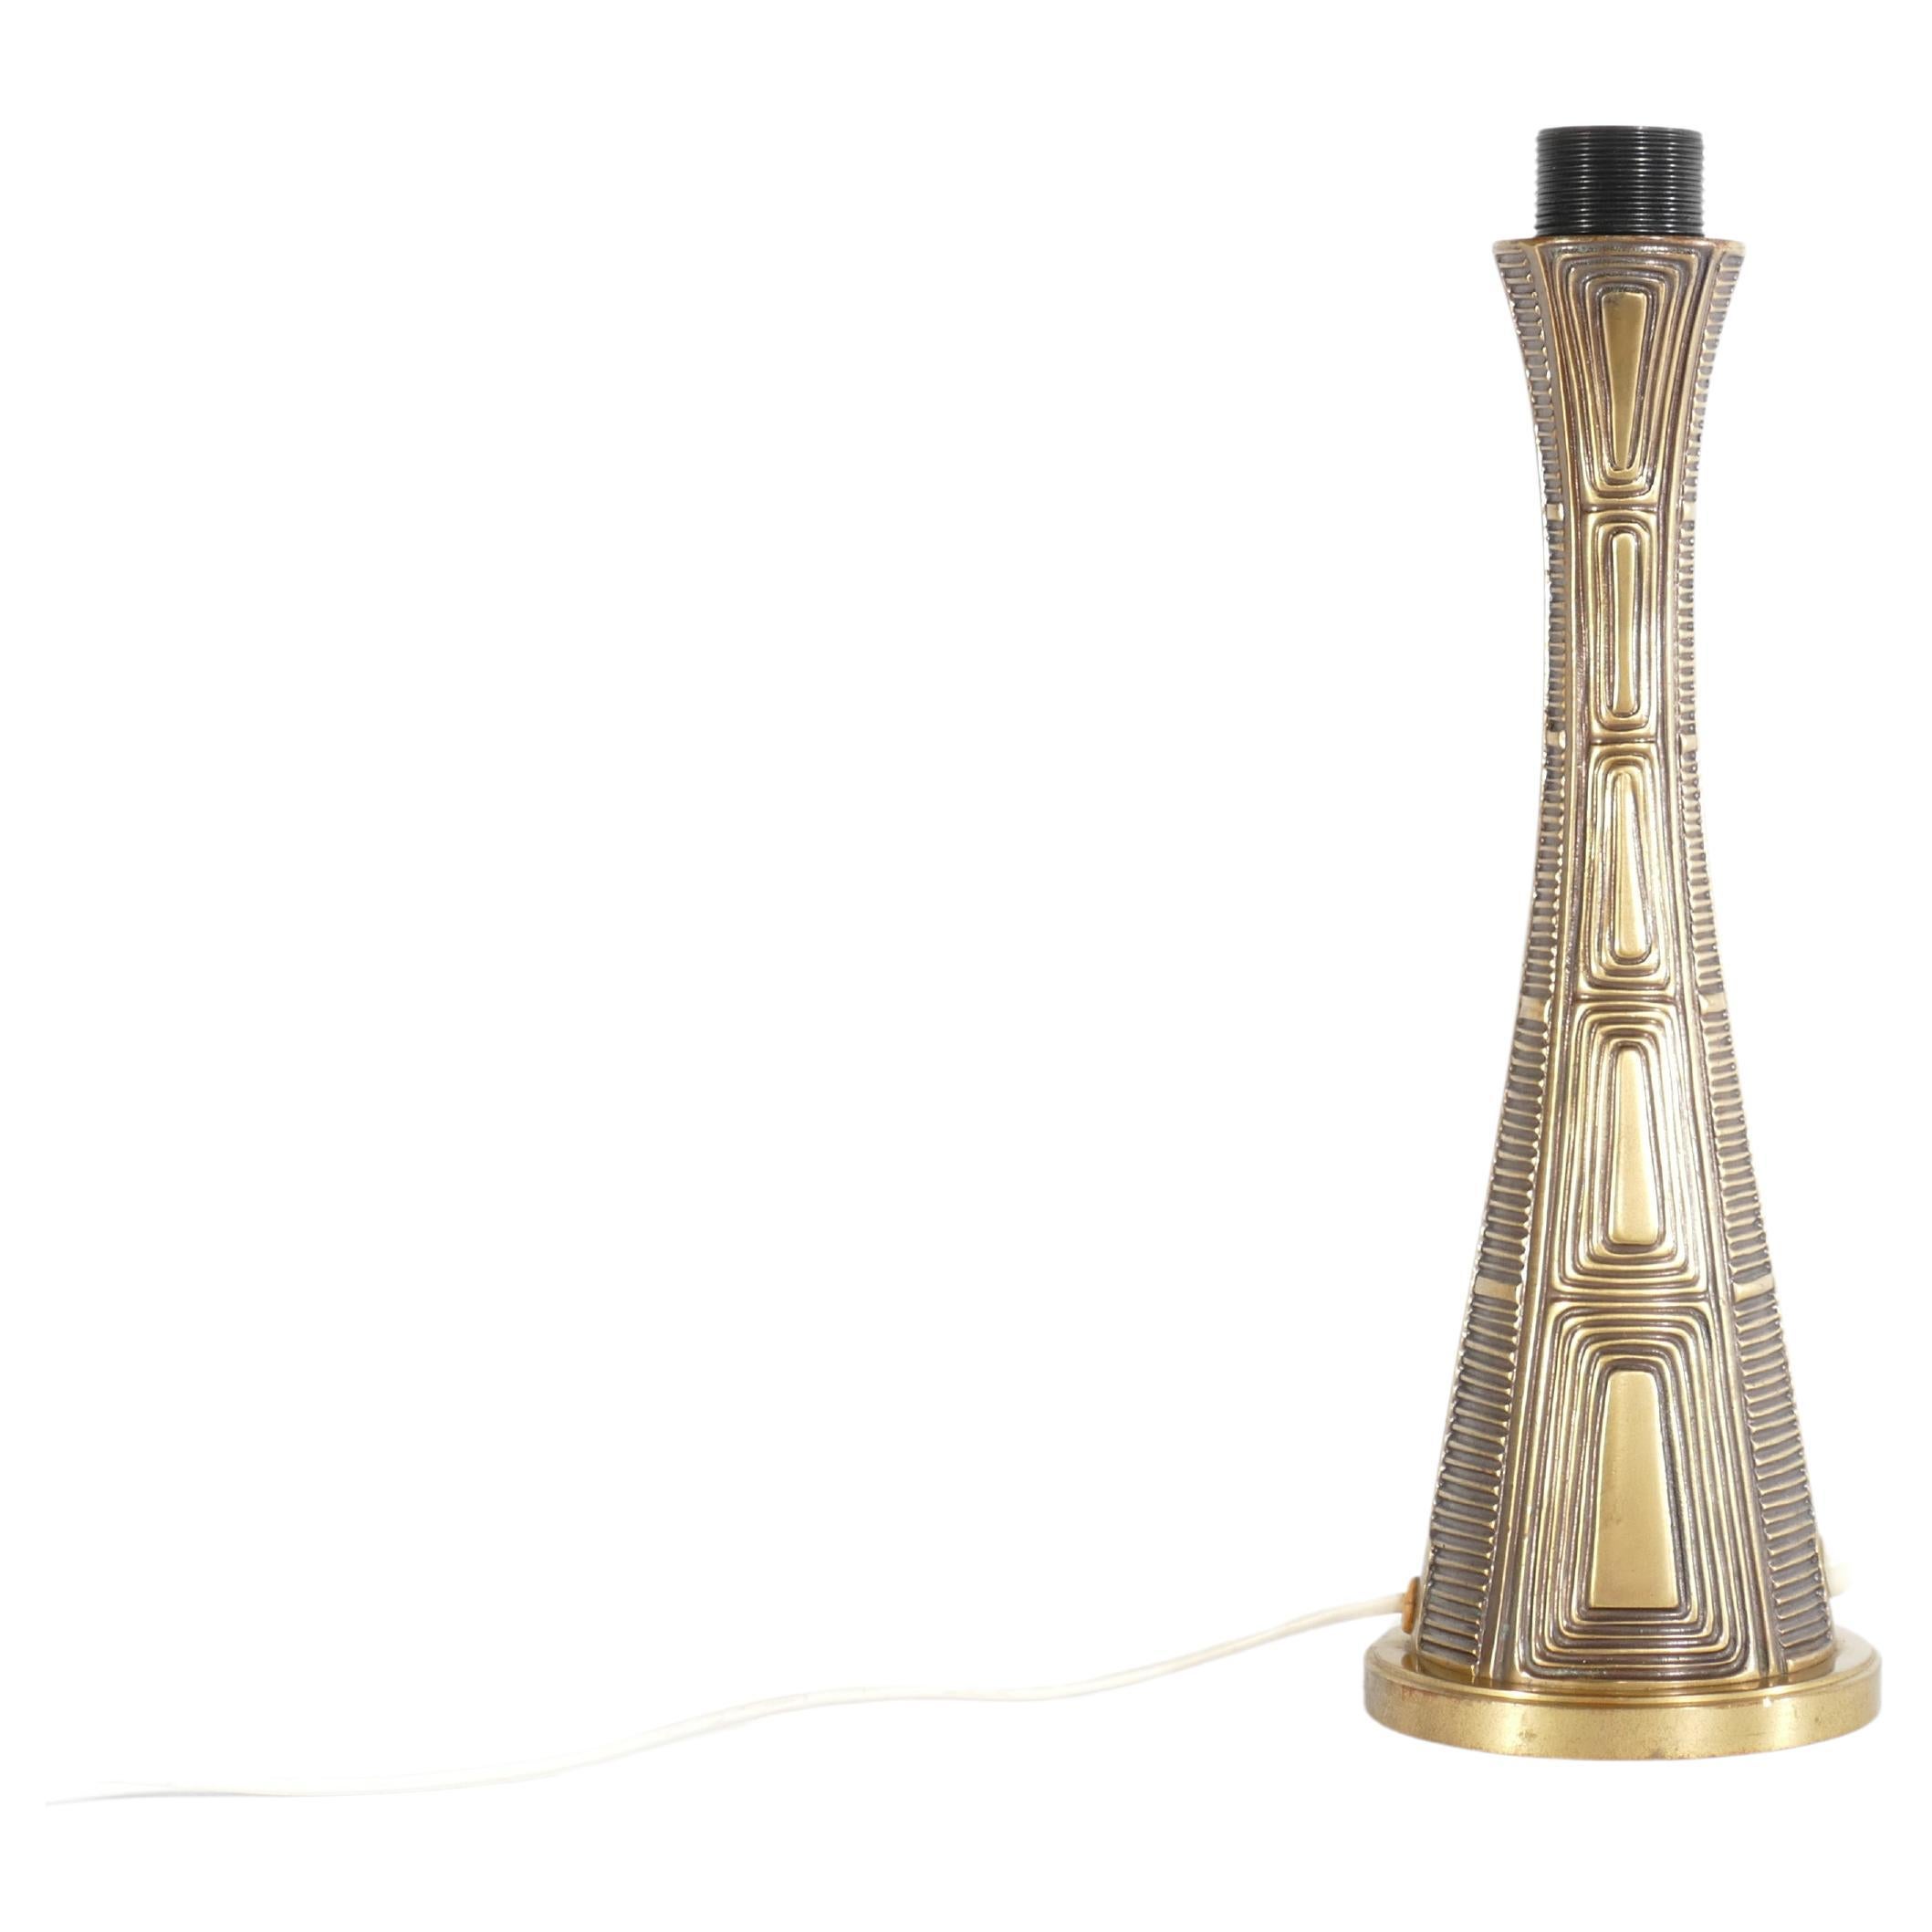 An elegant brass table lamp, a creation of the renowned Swedish sculptor Sonja Katzin (1919-2014), and produced by ASEA in Sweden during the 1950s. This lamp, bearing the stamped model E1140 from ASEA, stands at a graceful height of 37 cm.

Sonja